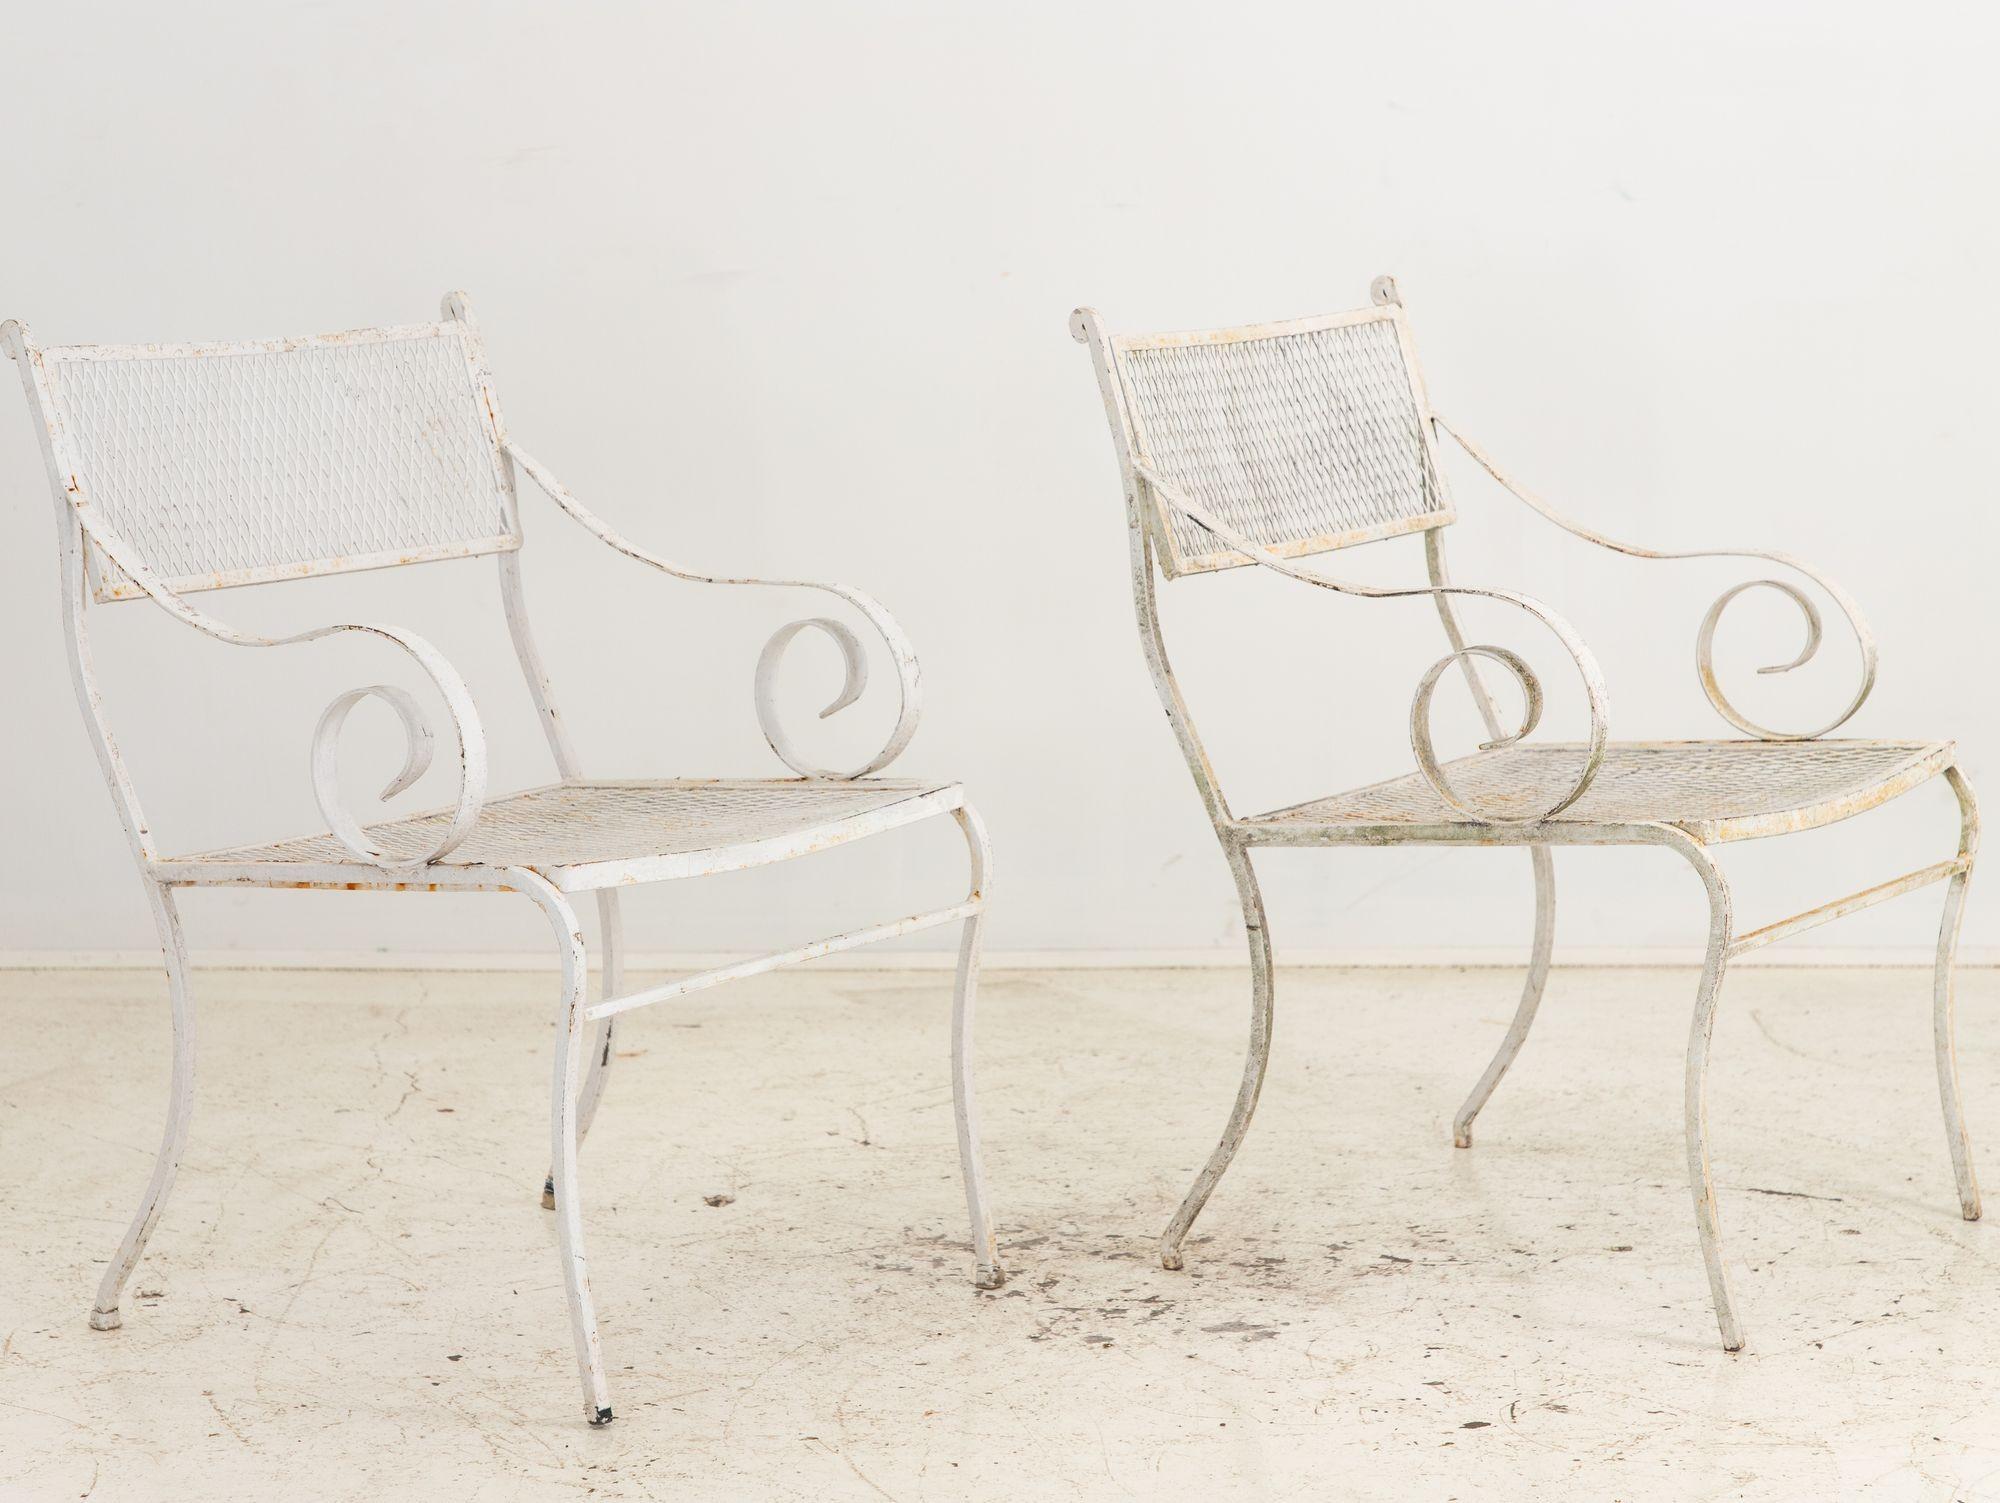 Pair White Painted Metal Garden Chairs, American mid 20th Century For Sale 2